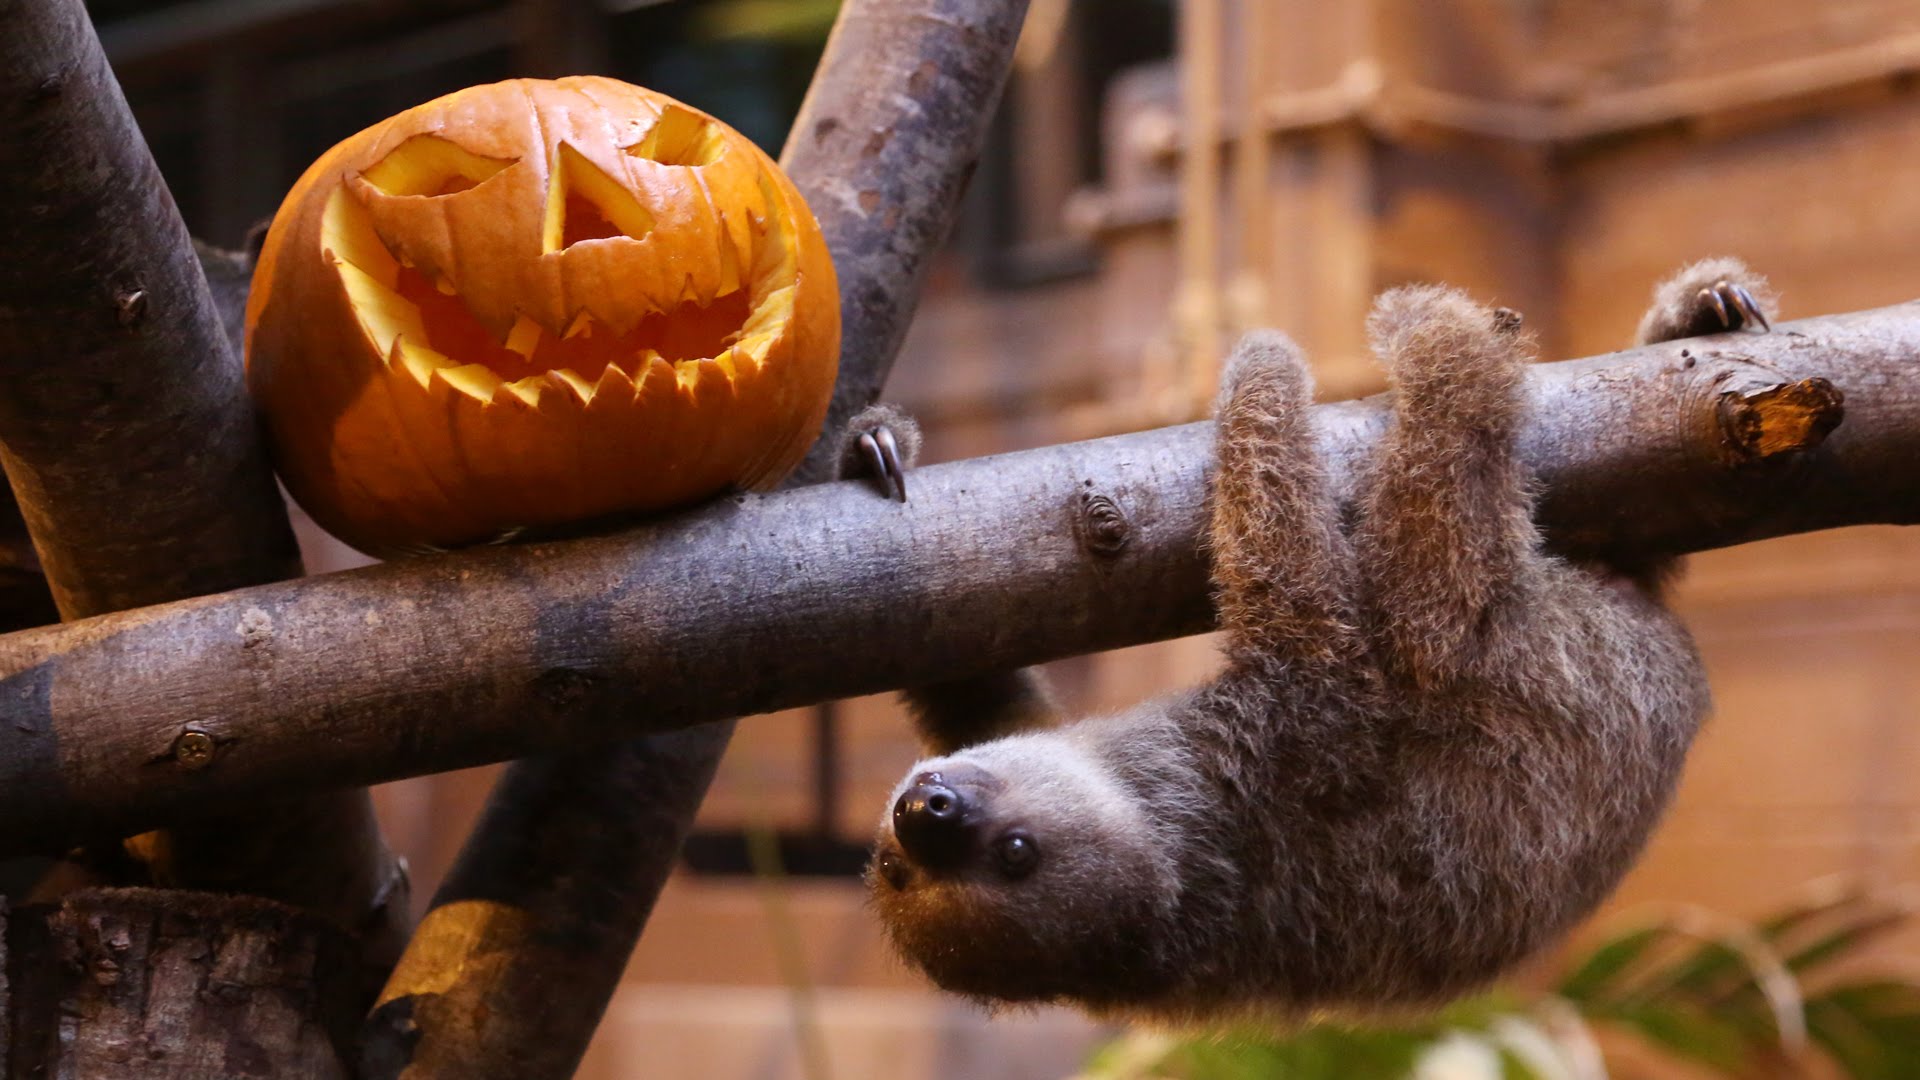 Edward the sloth is ready for his first Halloween